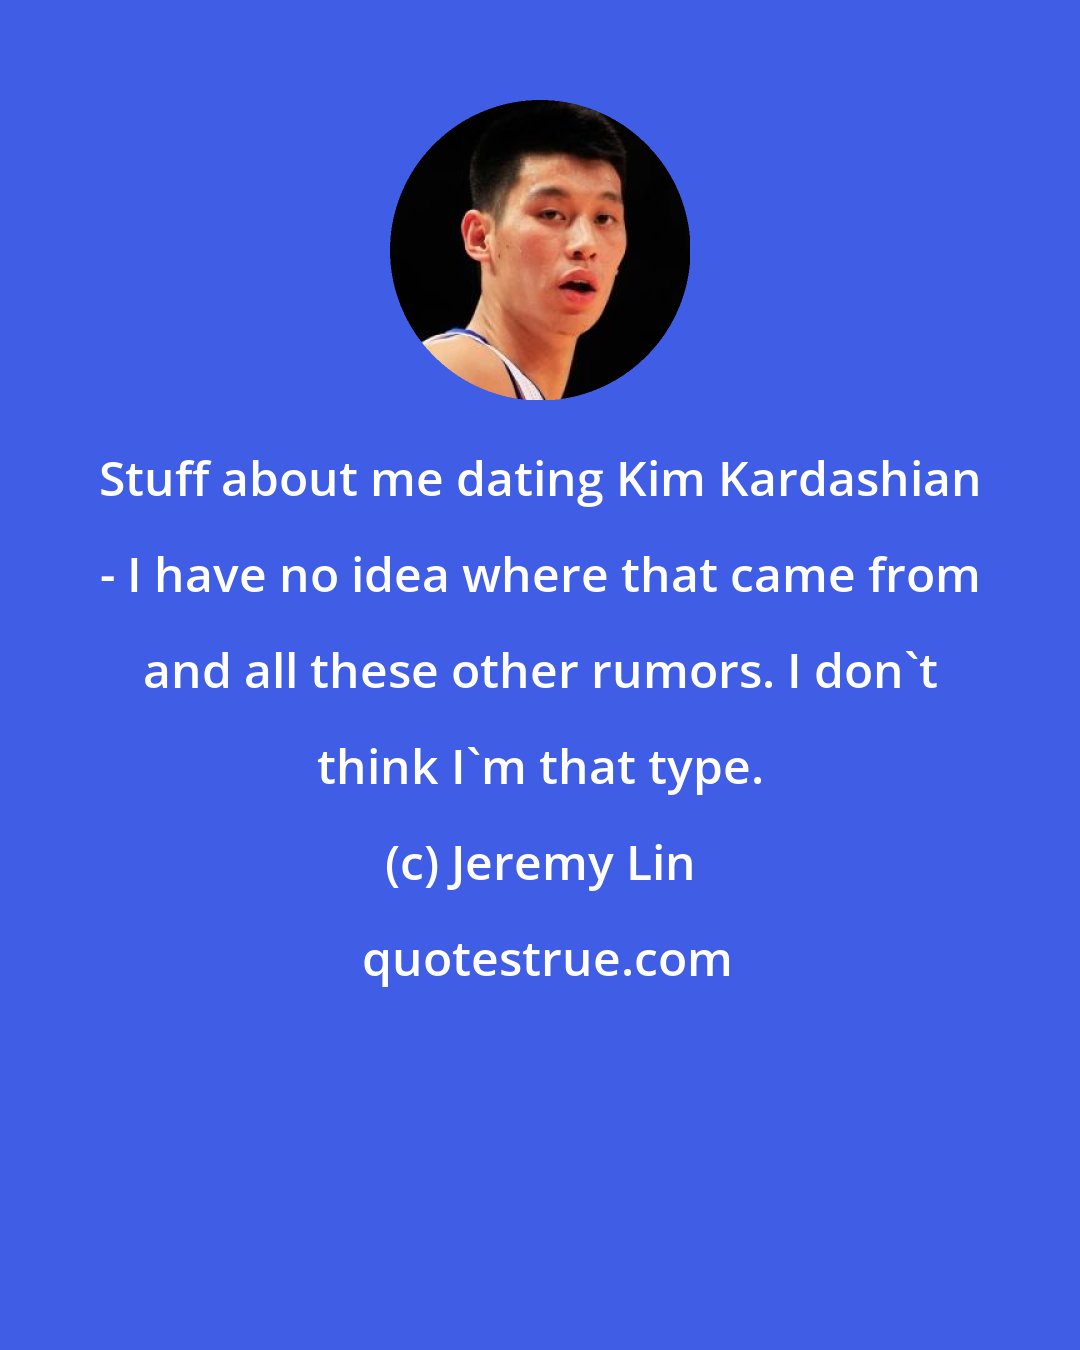 Jeremy Lin: Stuff about me dating Kim Kardashian - I have no idea where that came from and all these other rumors. I don't think I'm that type.